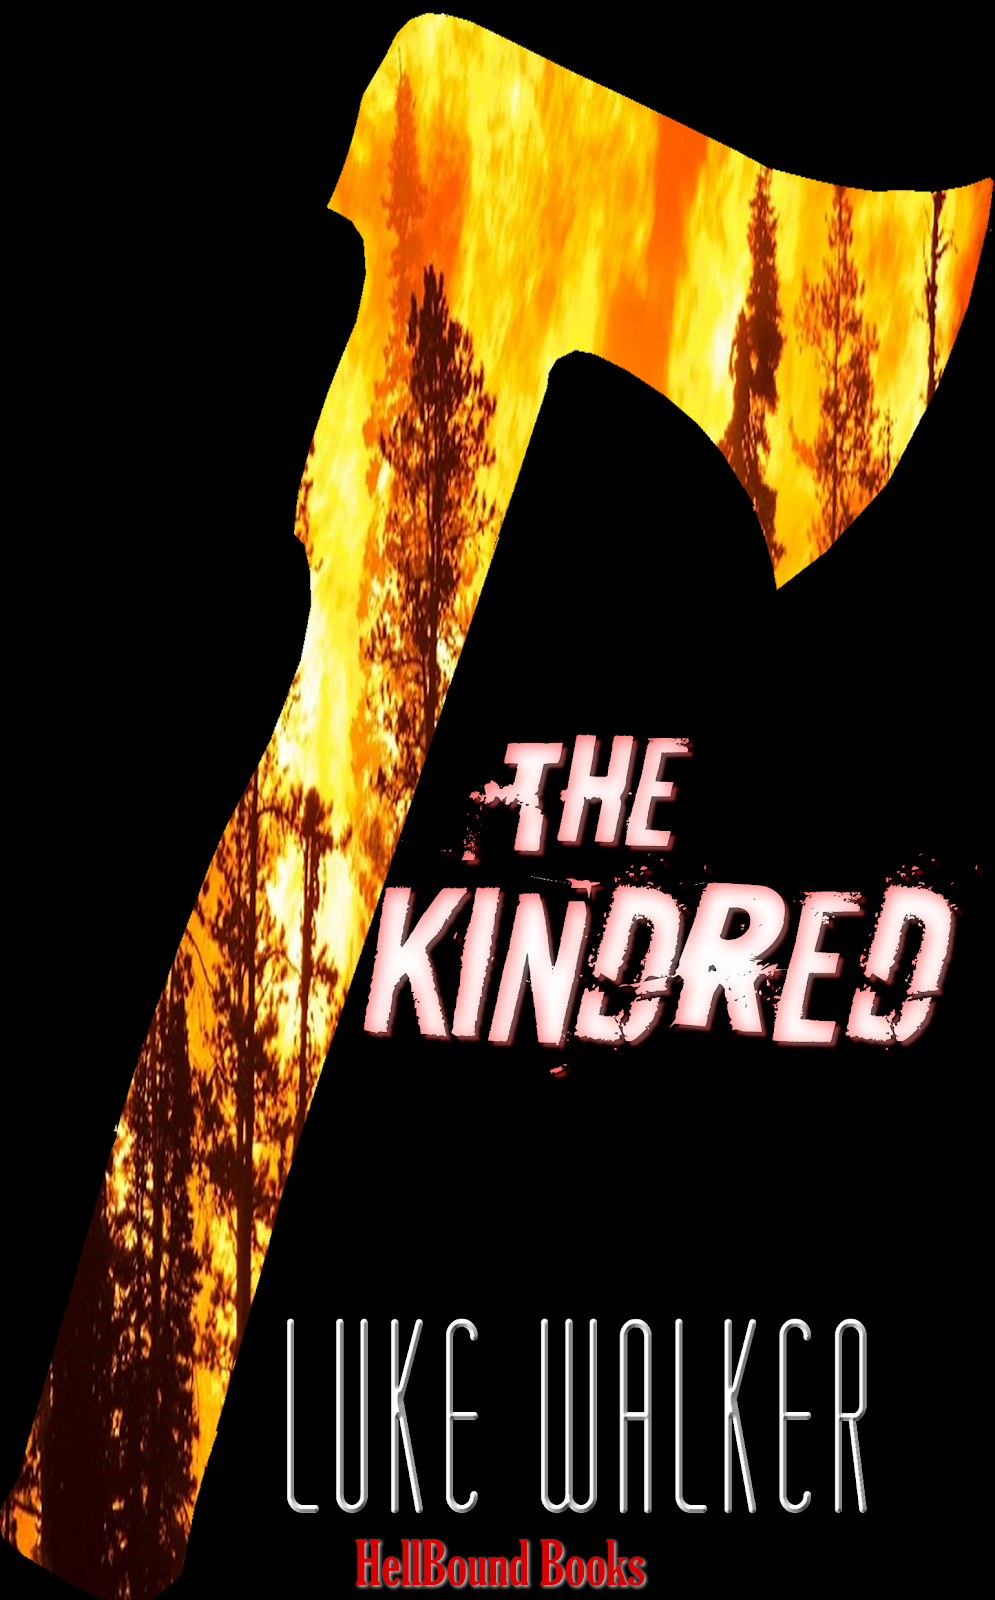 THE KINDRED